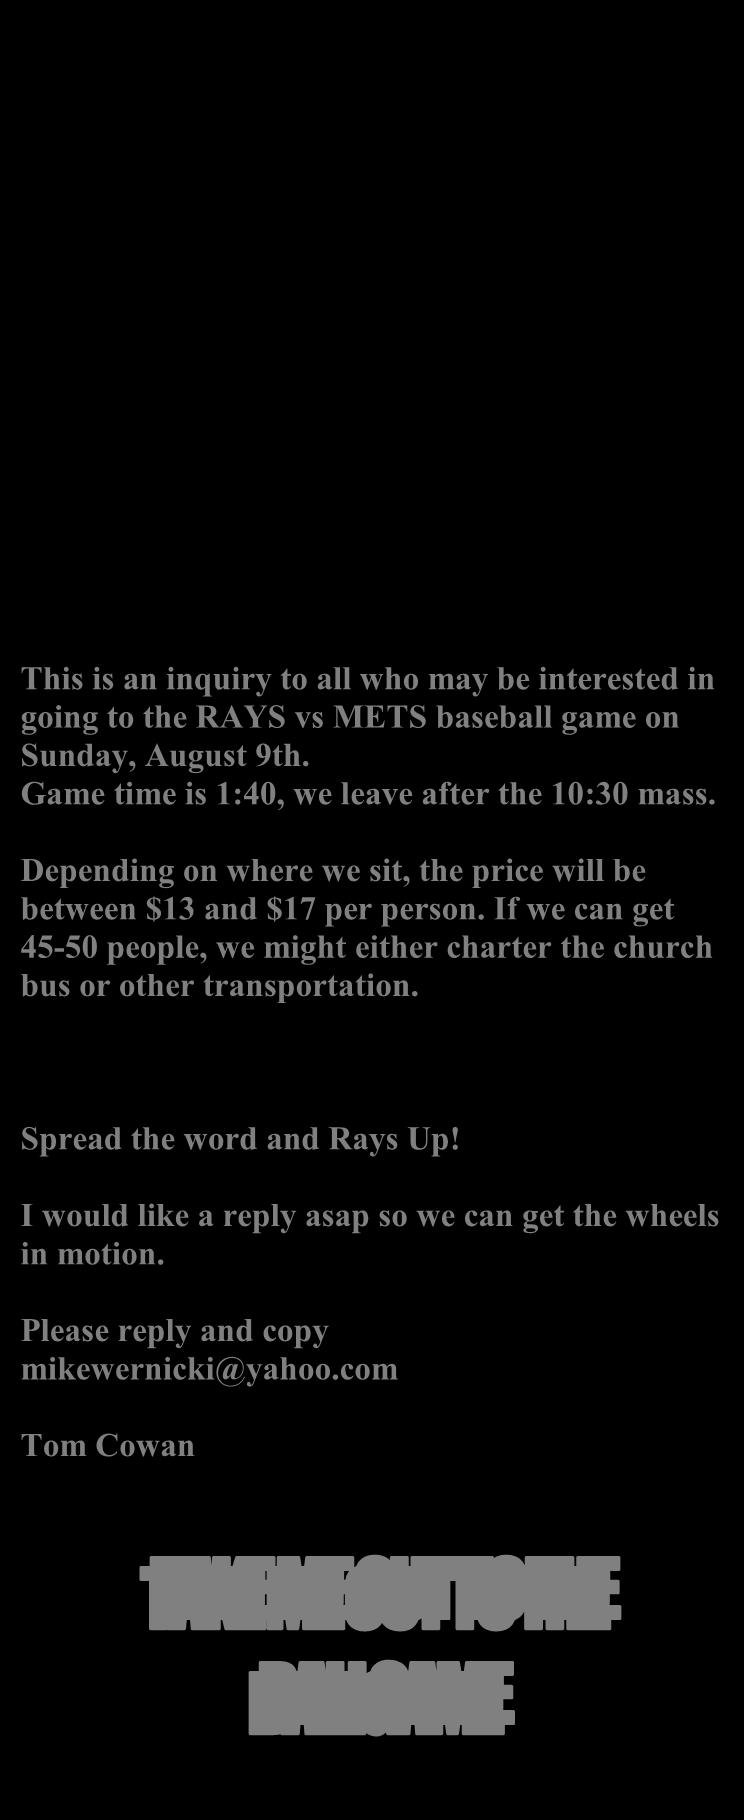 If we can get 45-50 people, we might either charter the church bus or other